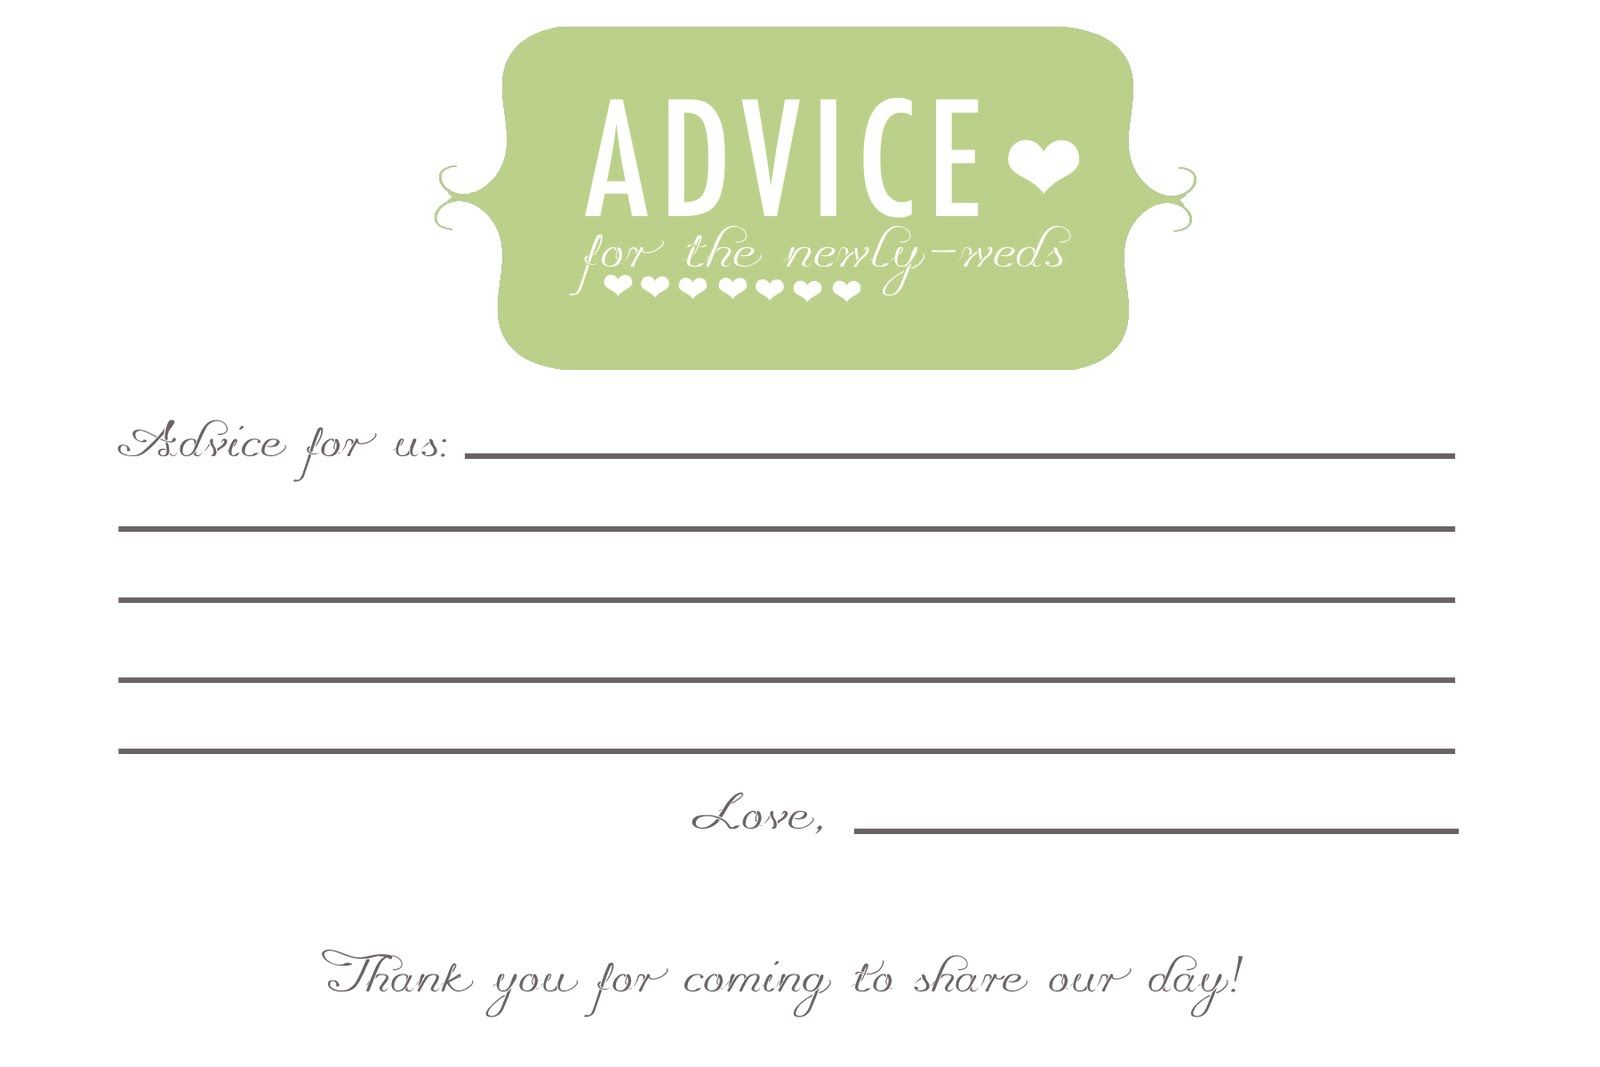 Free Printable Advice Cards For Mom - To -Be - Yahoo Image Search - Free Printable Bridal Shower Advice Cards